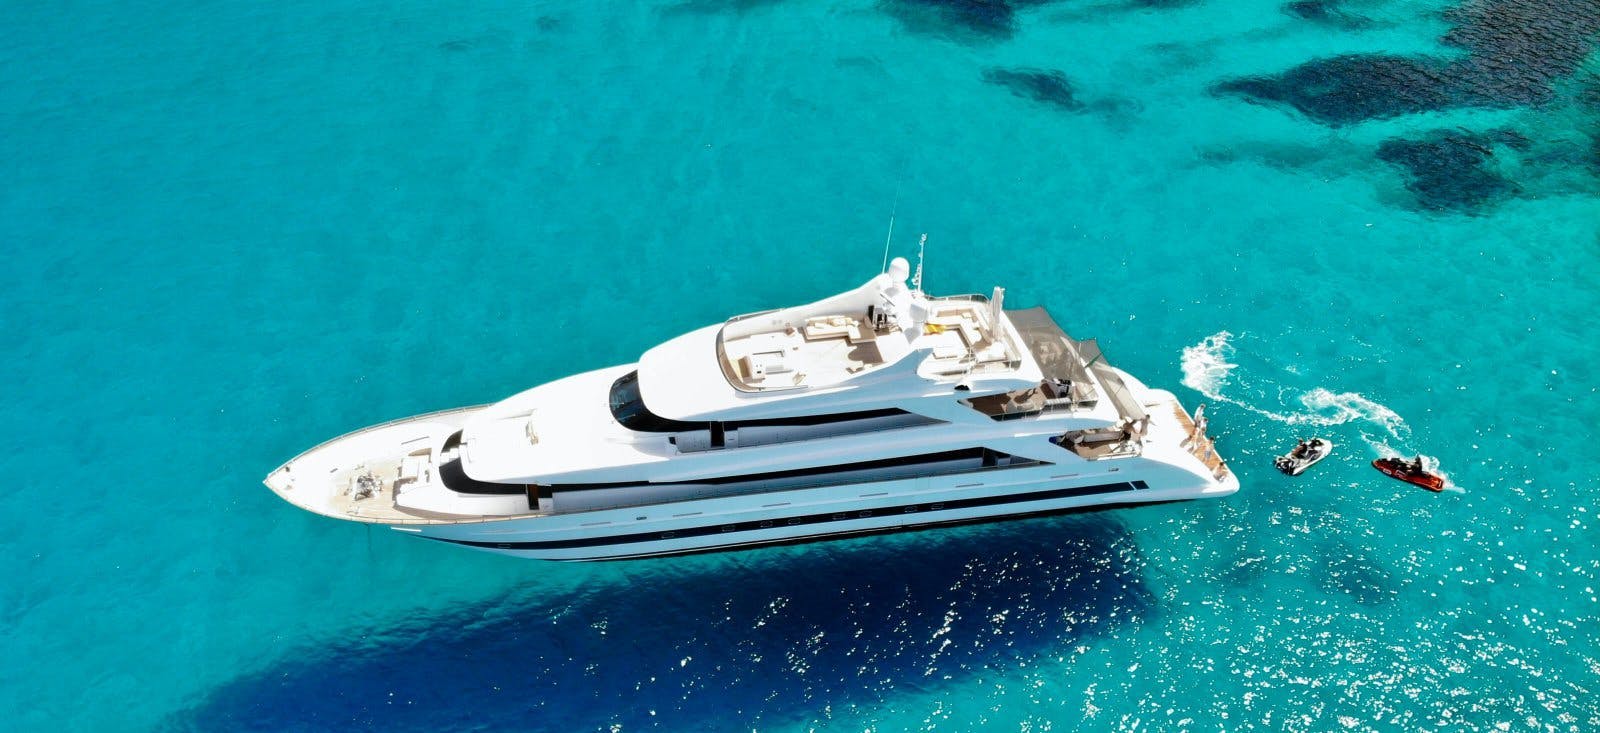 18 Yacht Charter Rules You Should Know